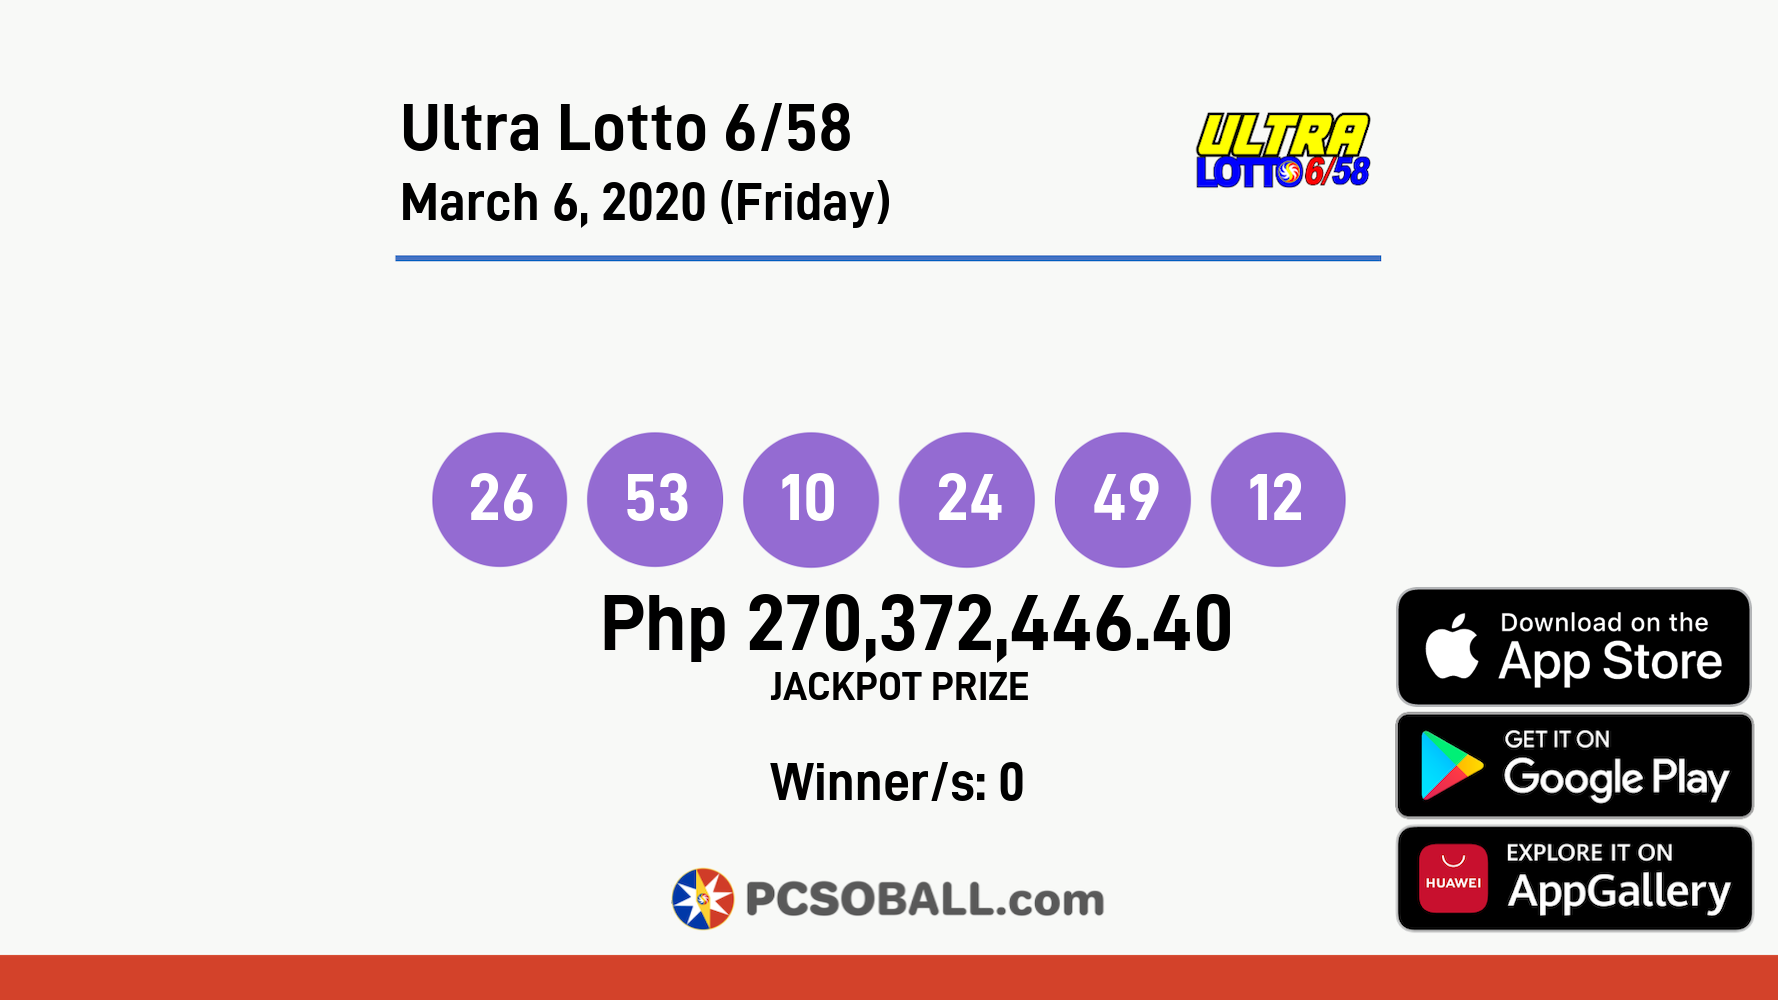 Ultra Lotto 6/58 March 6, 2020 (Friday) Result